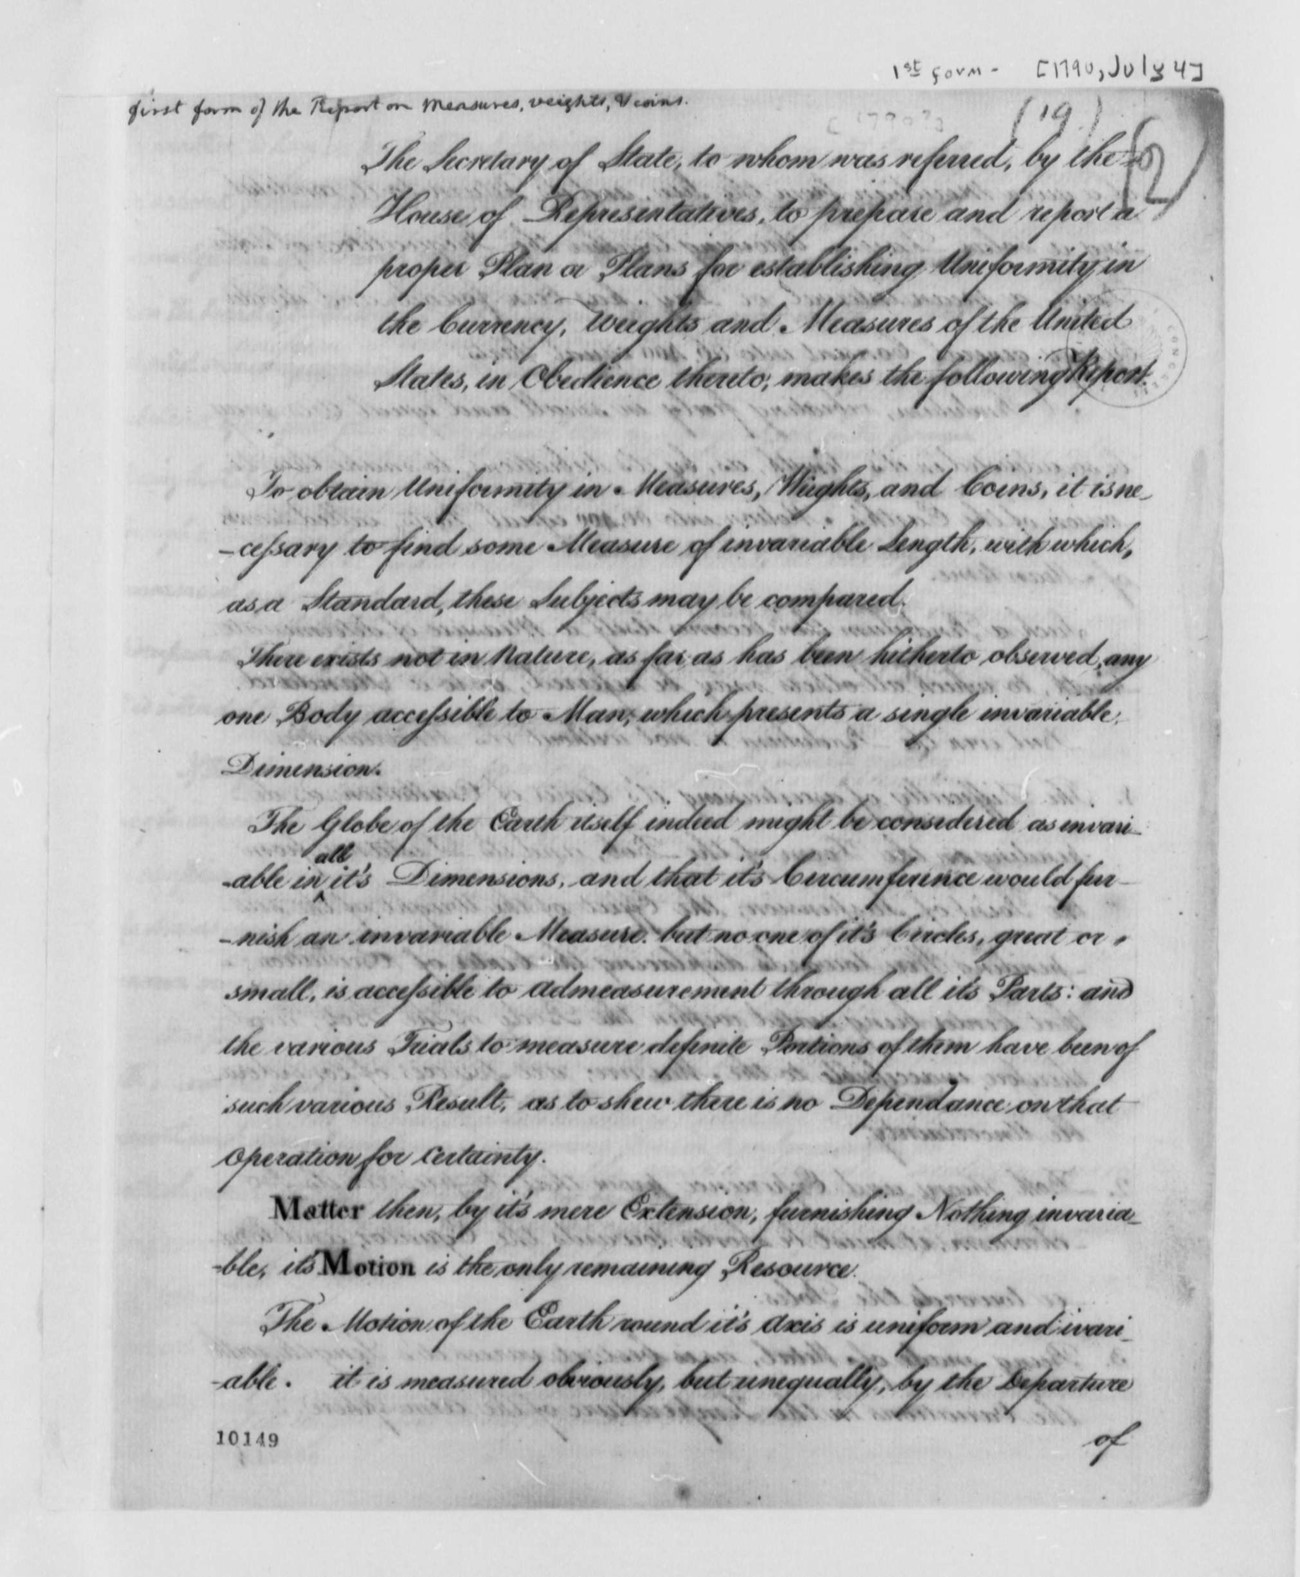 Thomas Jefferson to House of Representatives, July 4, 1790, Report on Plan for Establishing a Uniform Currency, with Draft Copy